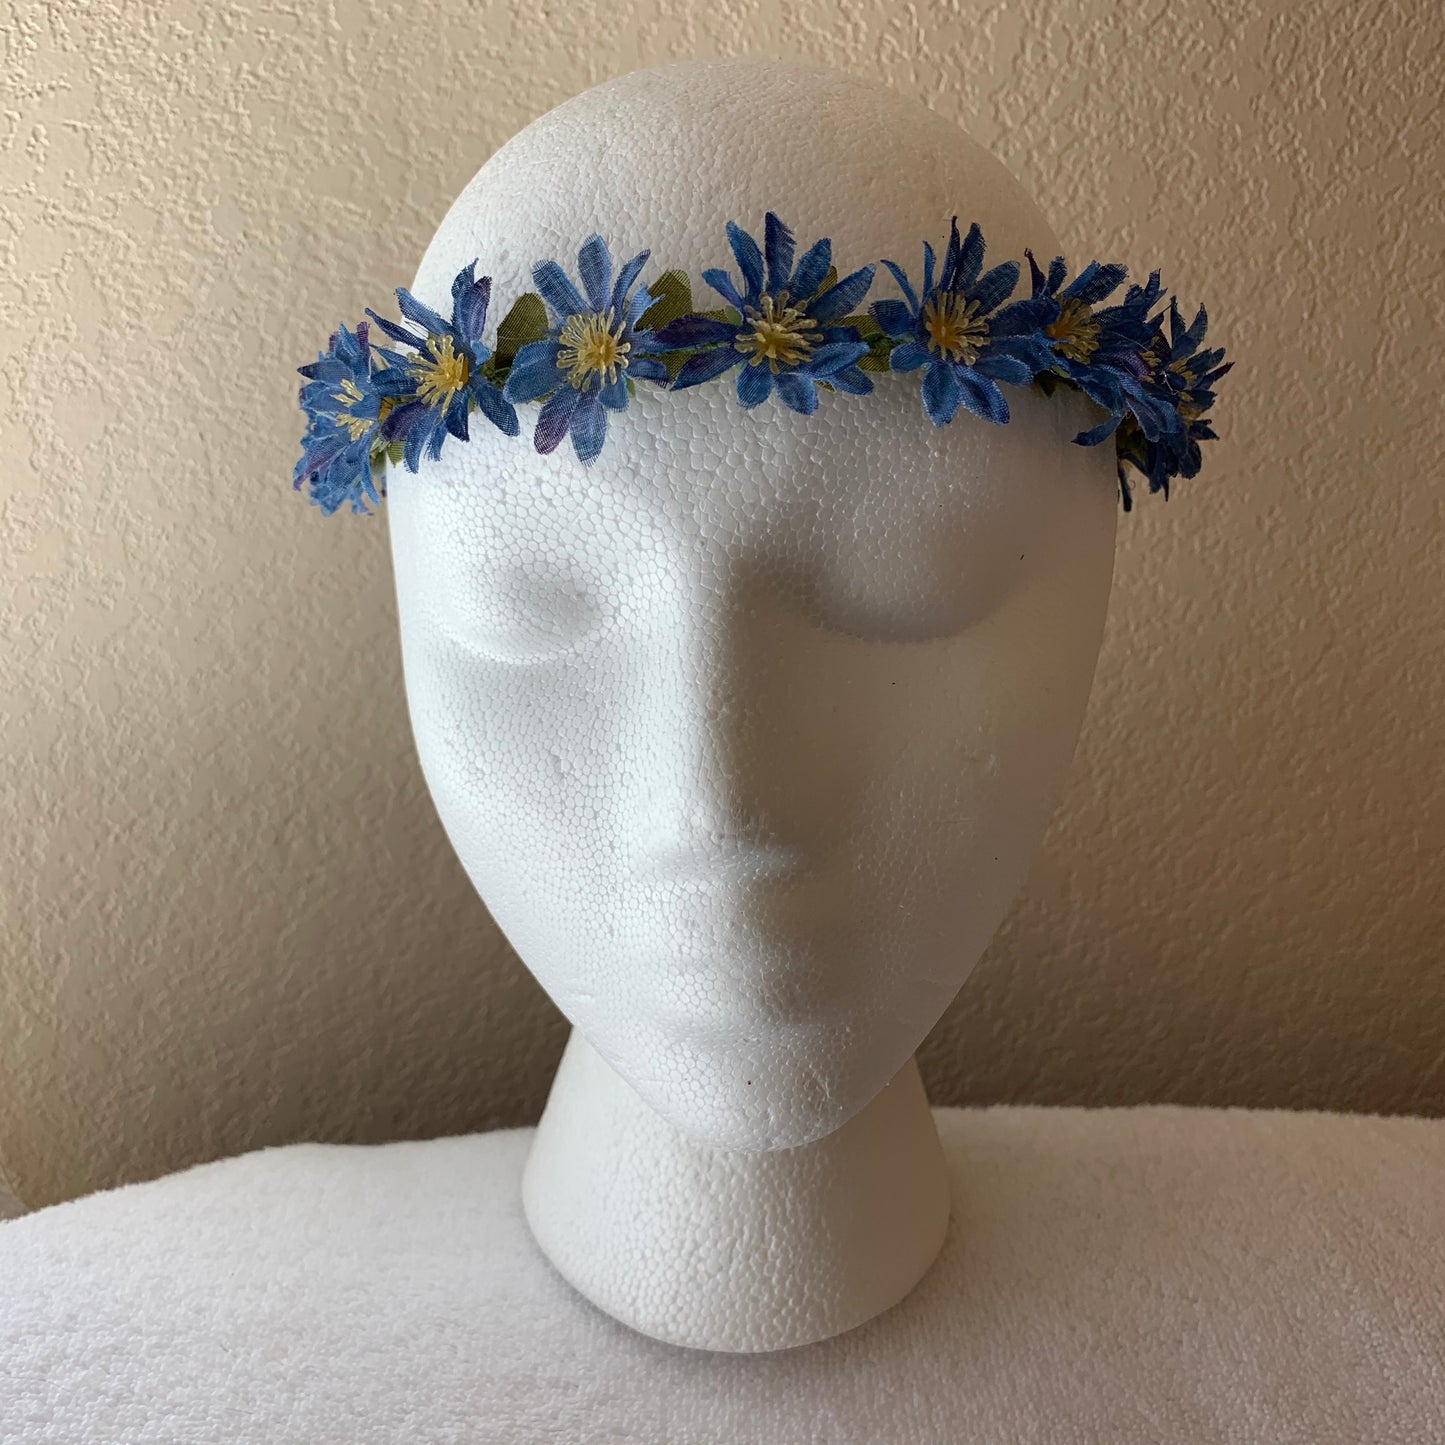 Extra Small Wreath - Blue Spiky Flowers with Yellow Centers